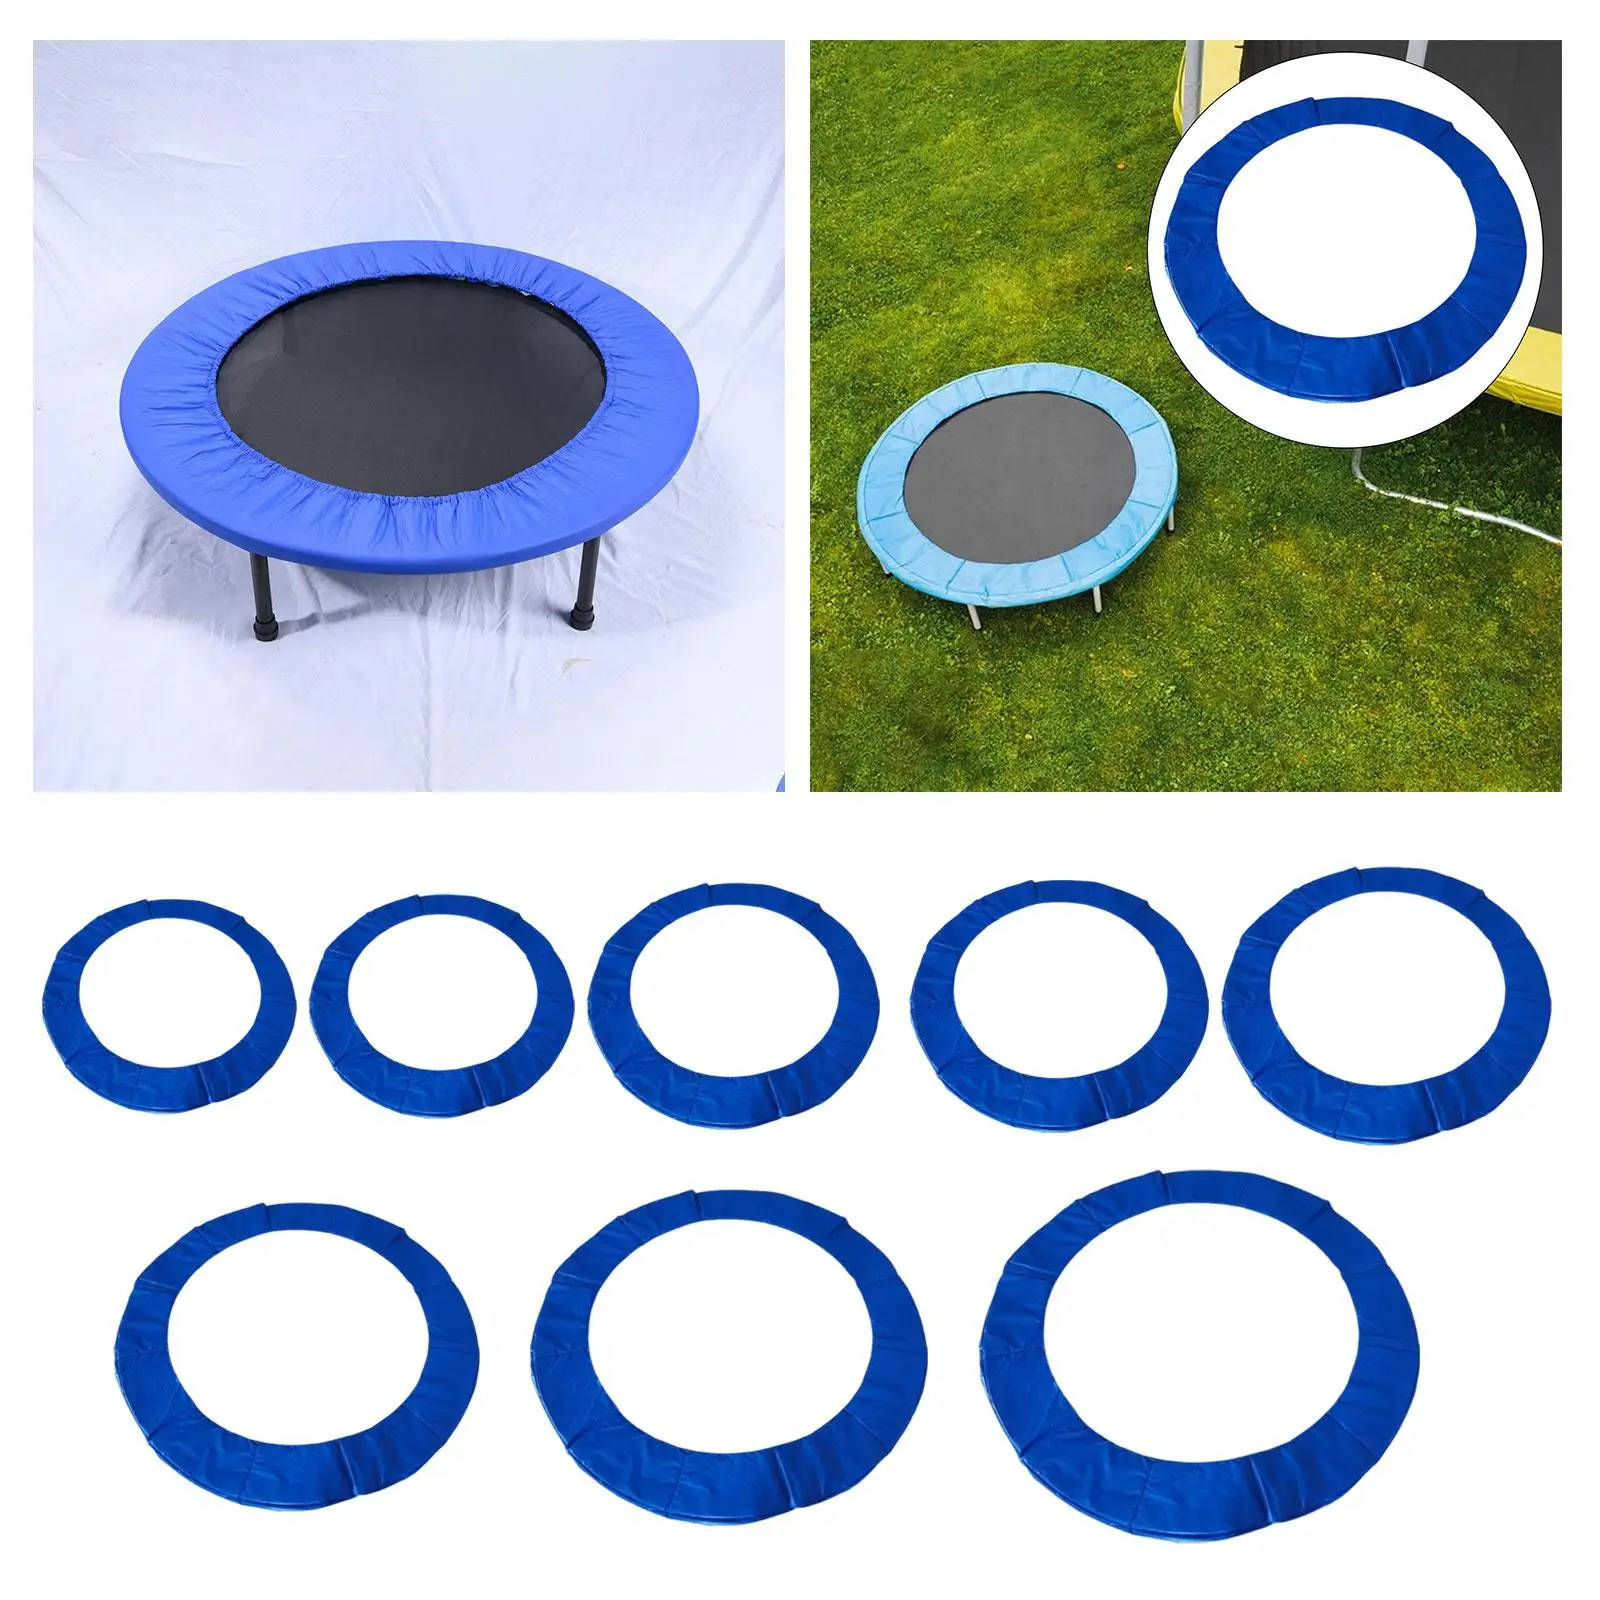 Trampoline Spring Cover No Holes for Pole Round Frame Pad Trampoline Pad